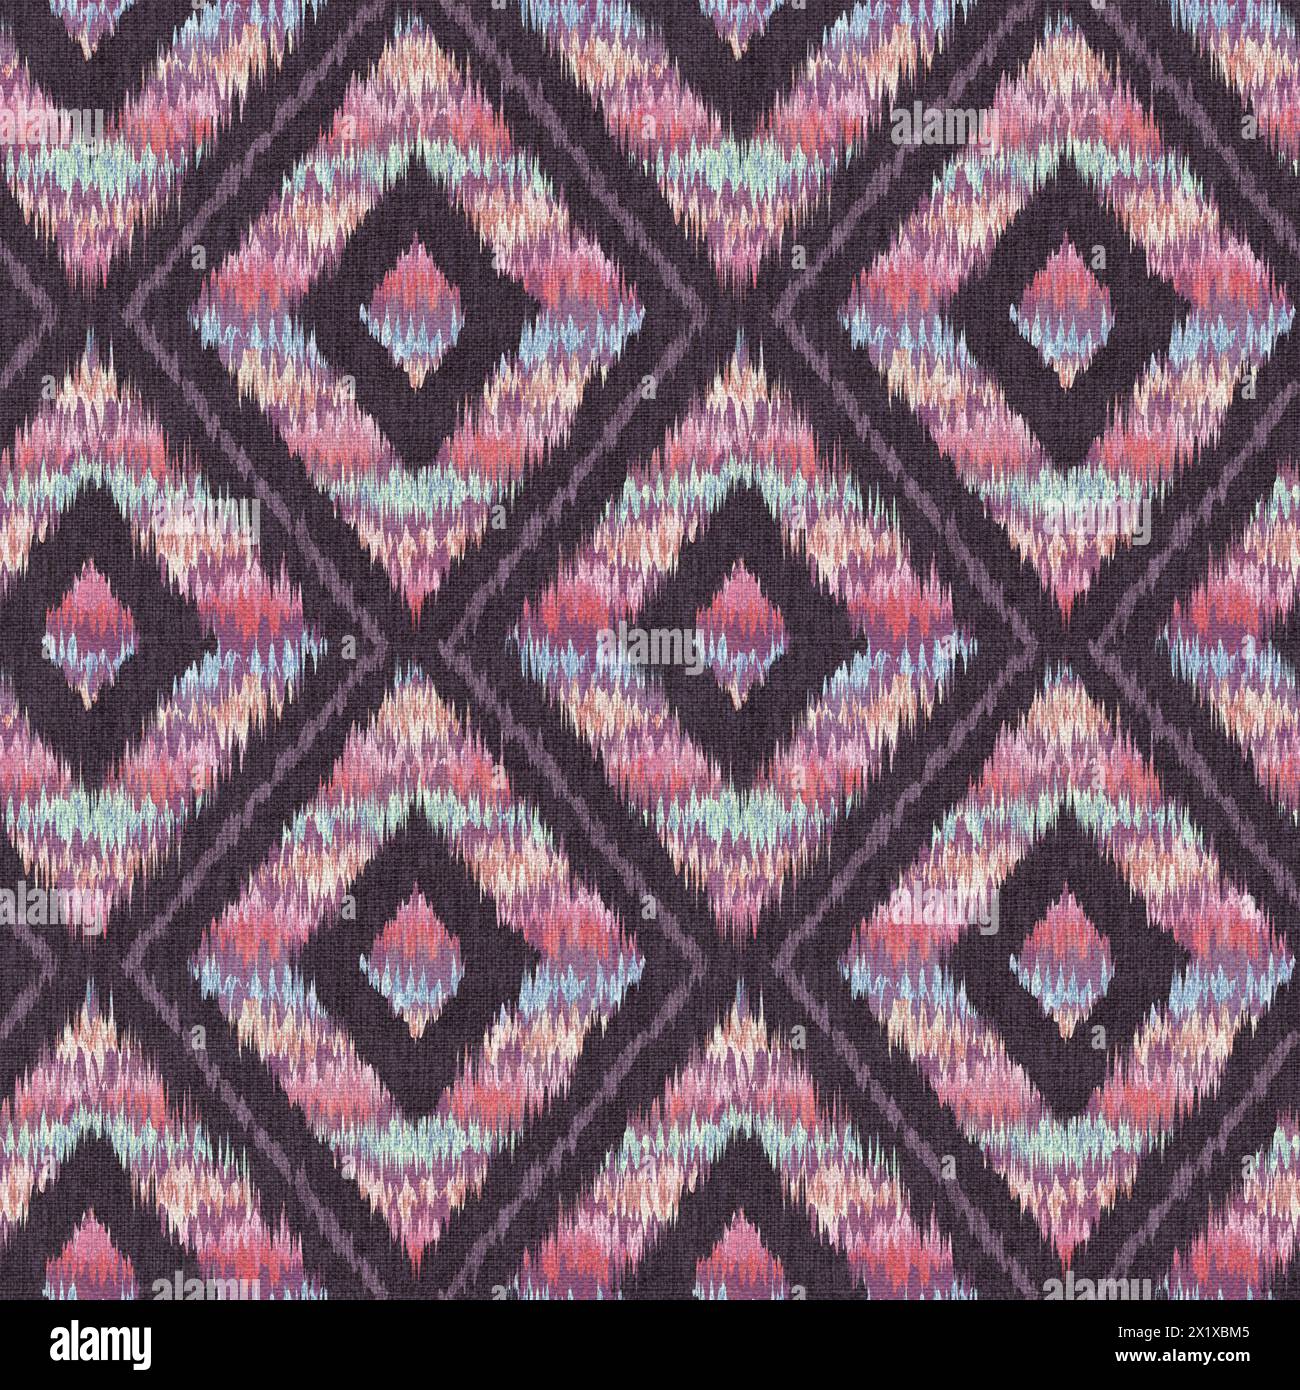 Vintage seamless pattern in Ikat style. Abstract pattern for home decor in retro style. Retro colorful ikat texture. Stock Photo